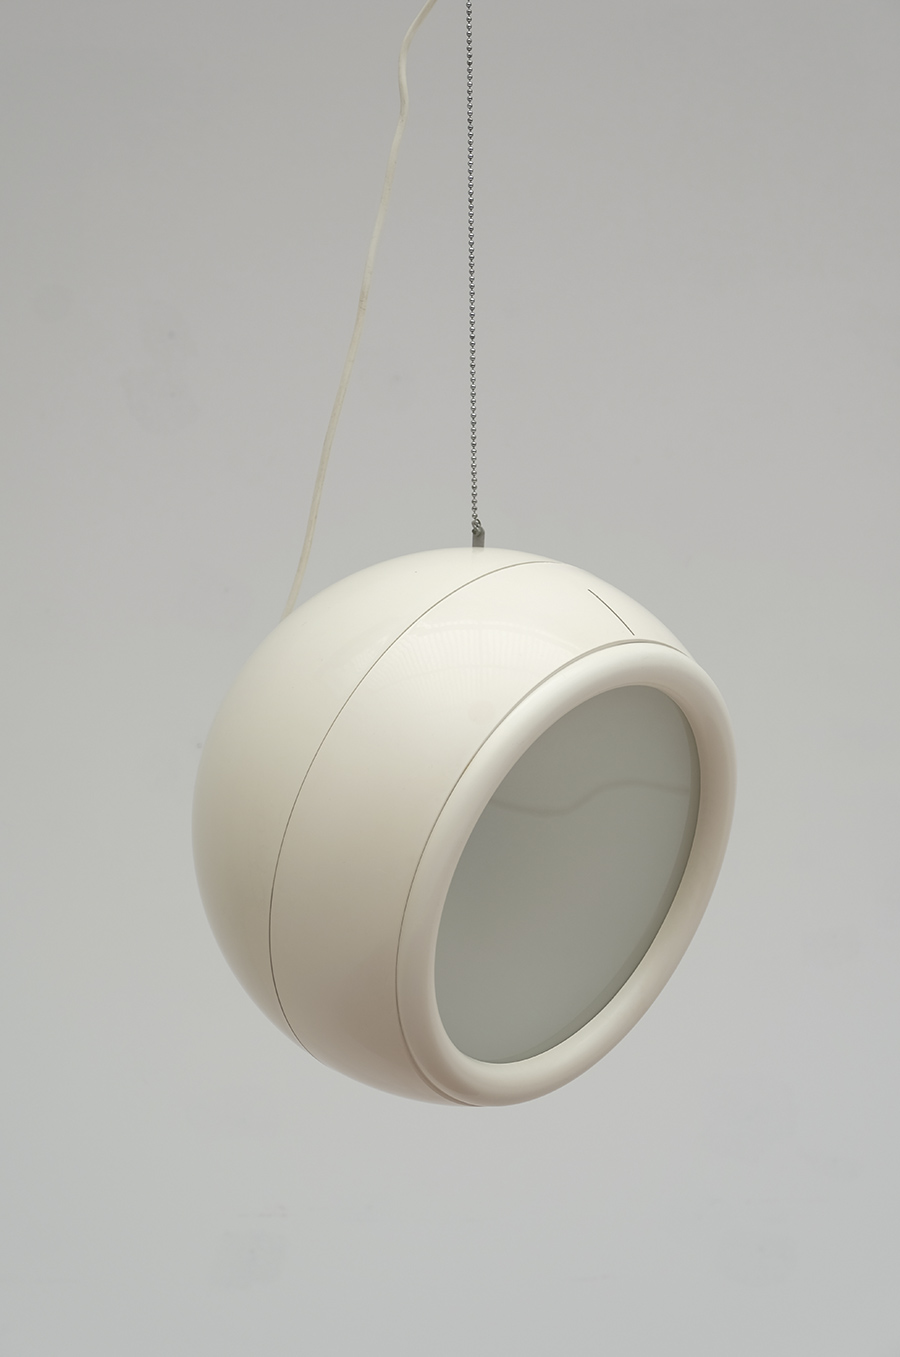 Pallade Lamp by Studio Tetrarch for Artemideimage 9